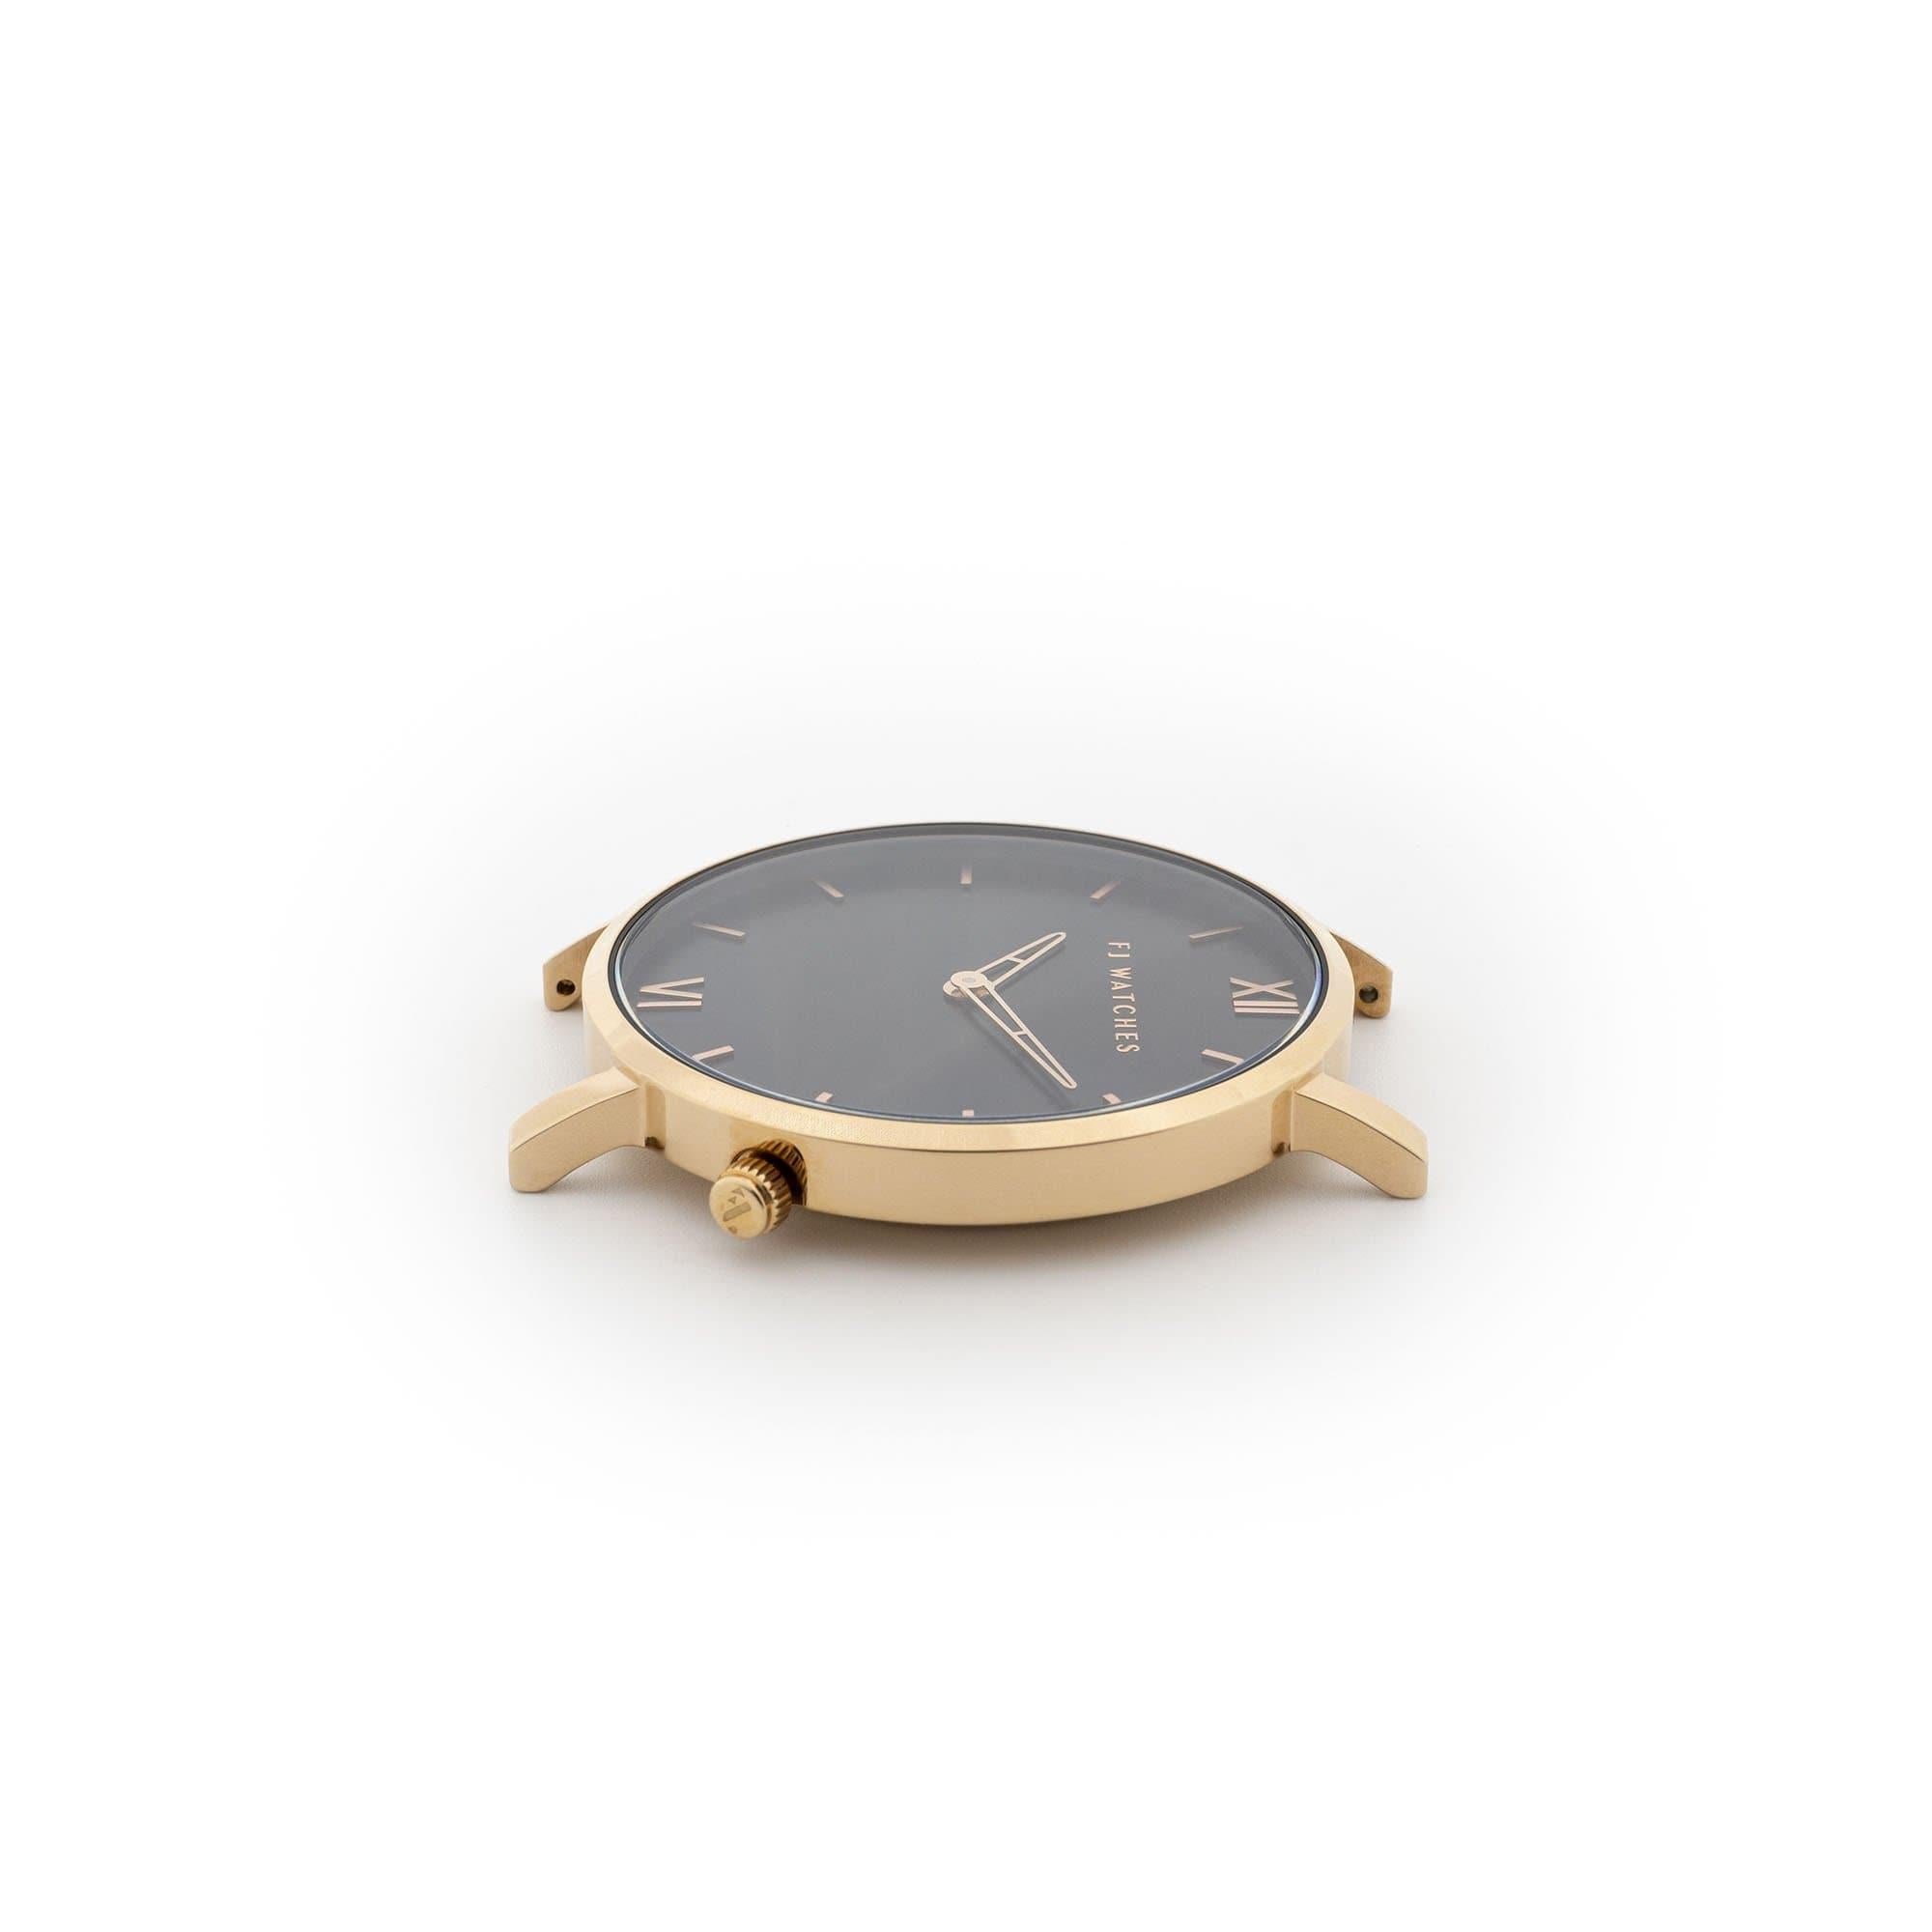 Discover Golden moon, a 42 mm men's watch from Five Jwlry with a black and rose gold dial. This one can be paired with a wide variety of leather colors, such as black, red, navy blue, gray, tan, brown and olive green!